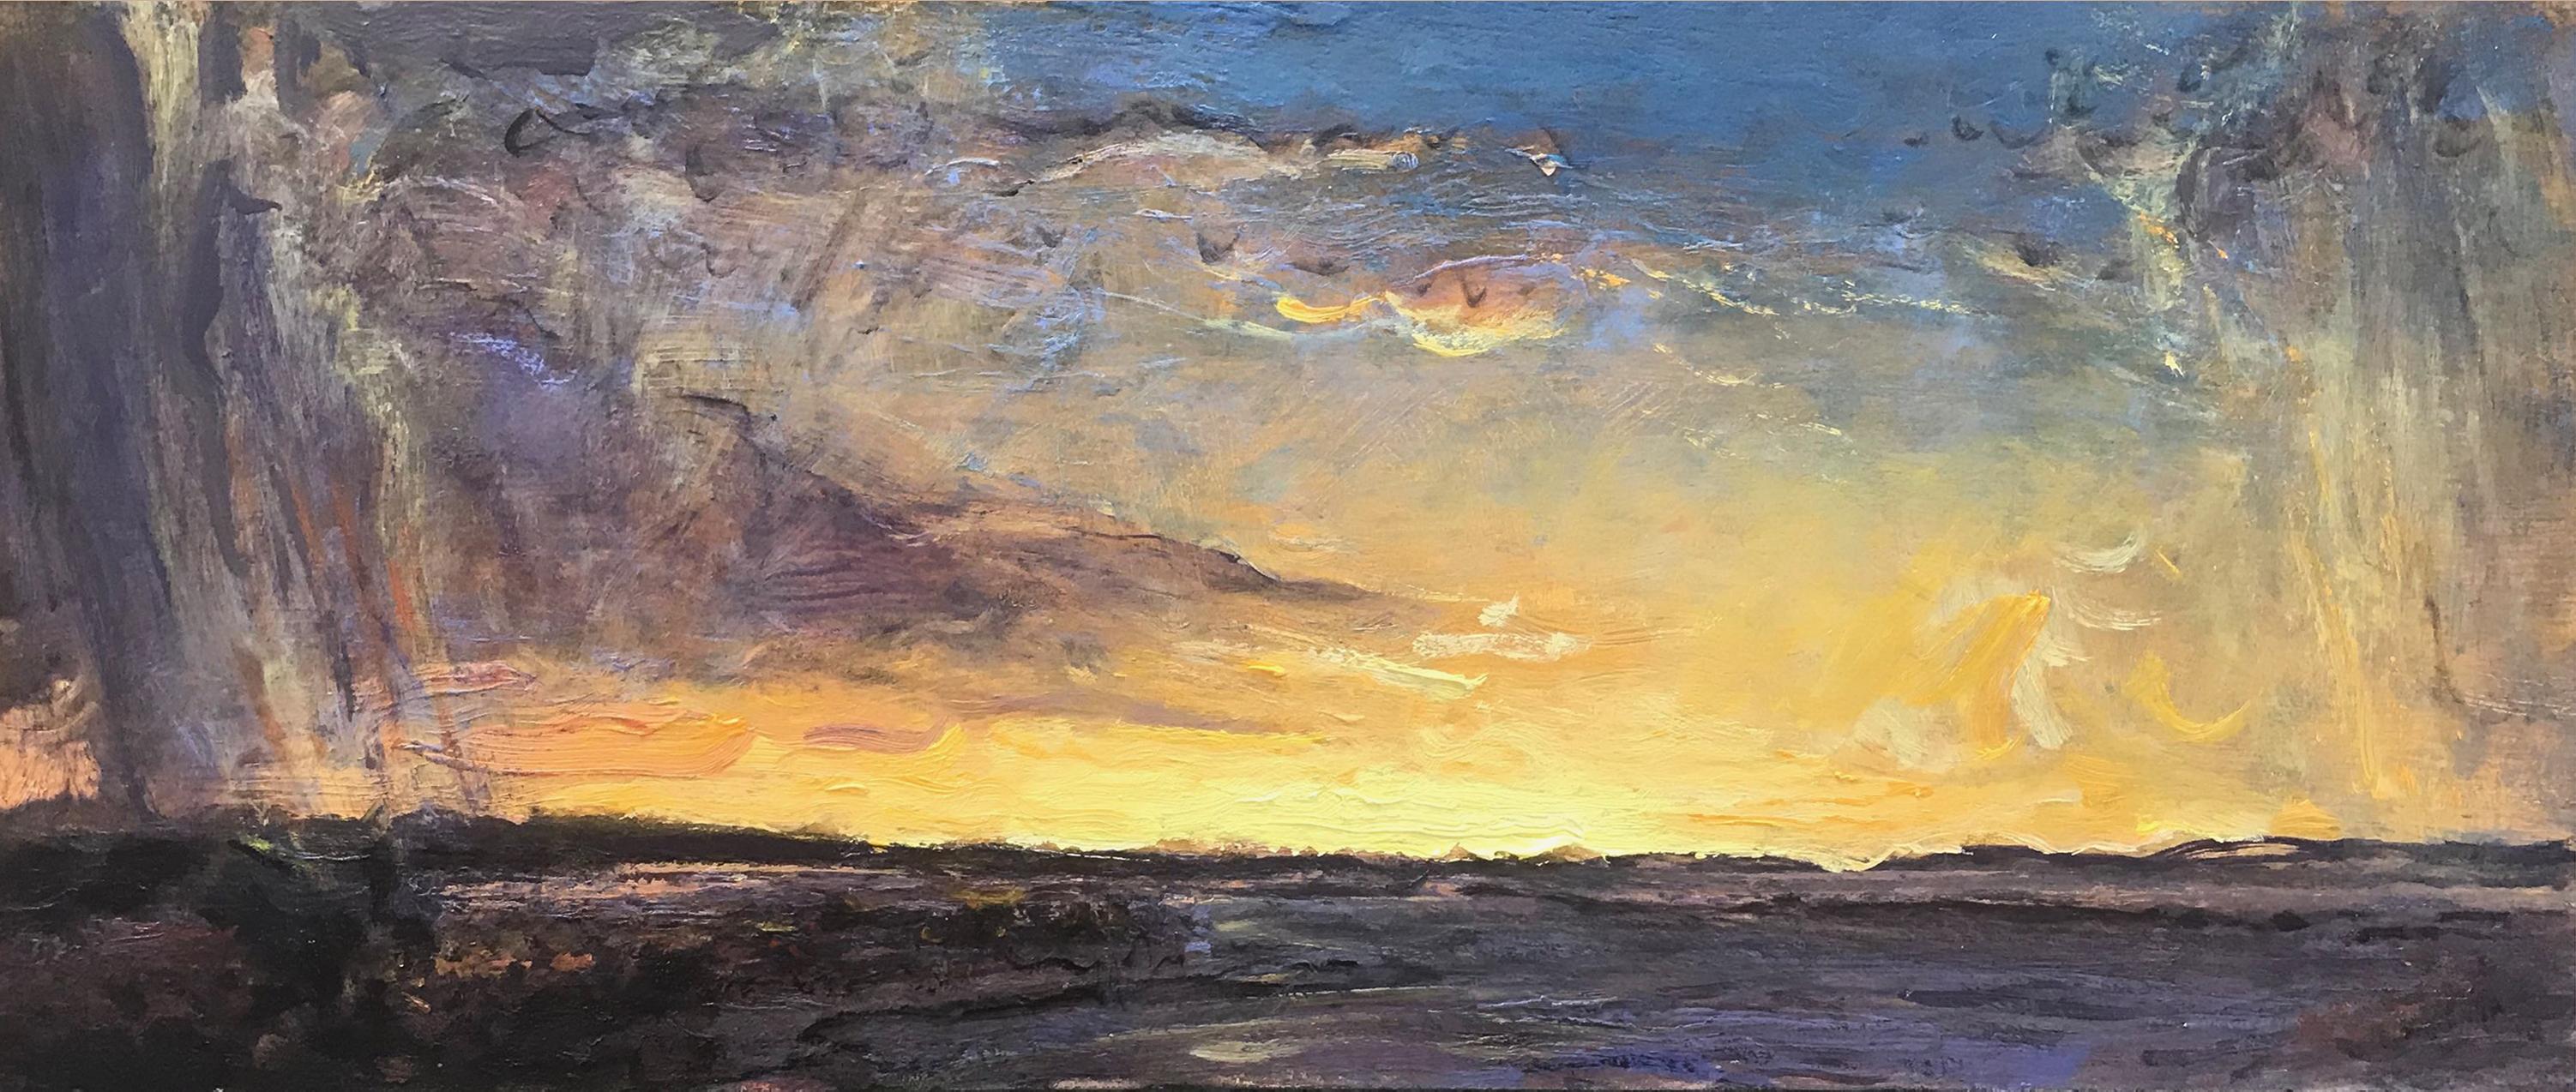 Gordon Brown Figurative Painting - "Sunset Storm", Oil Painting